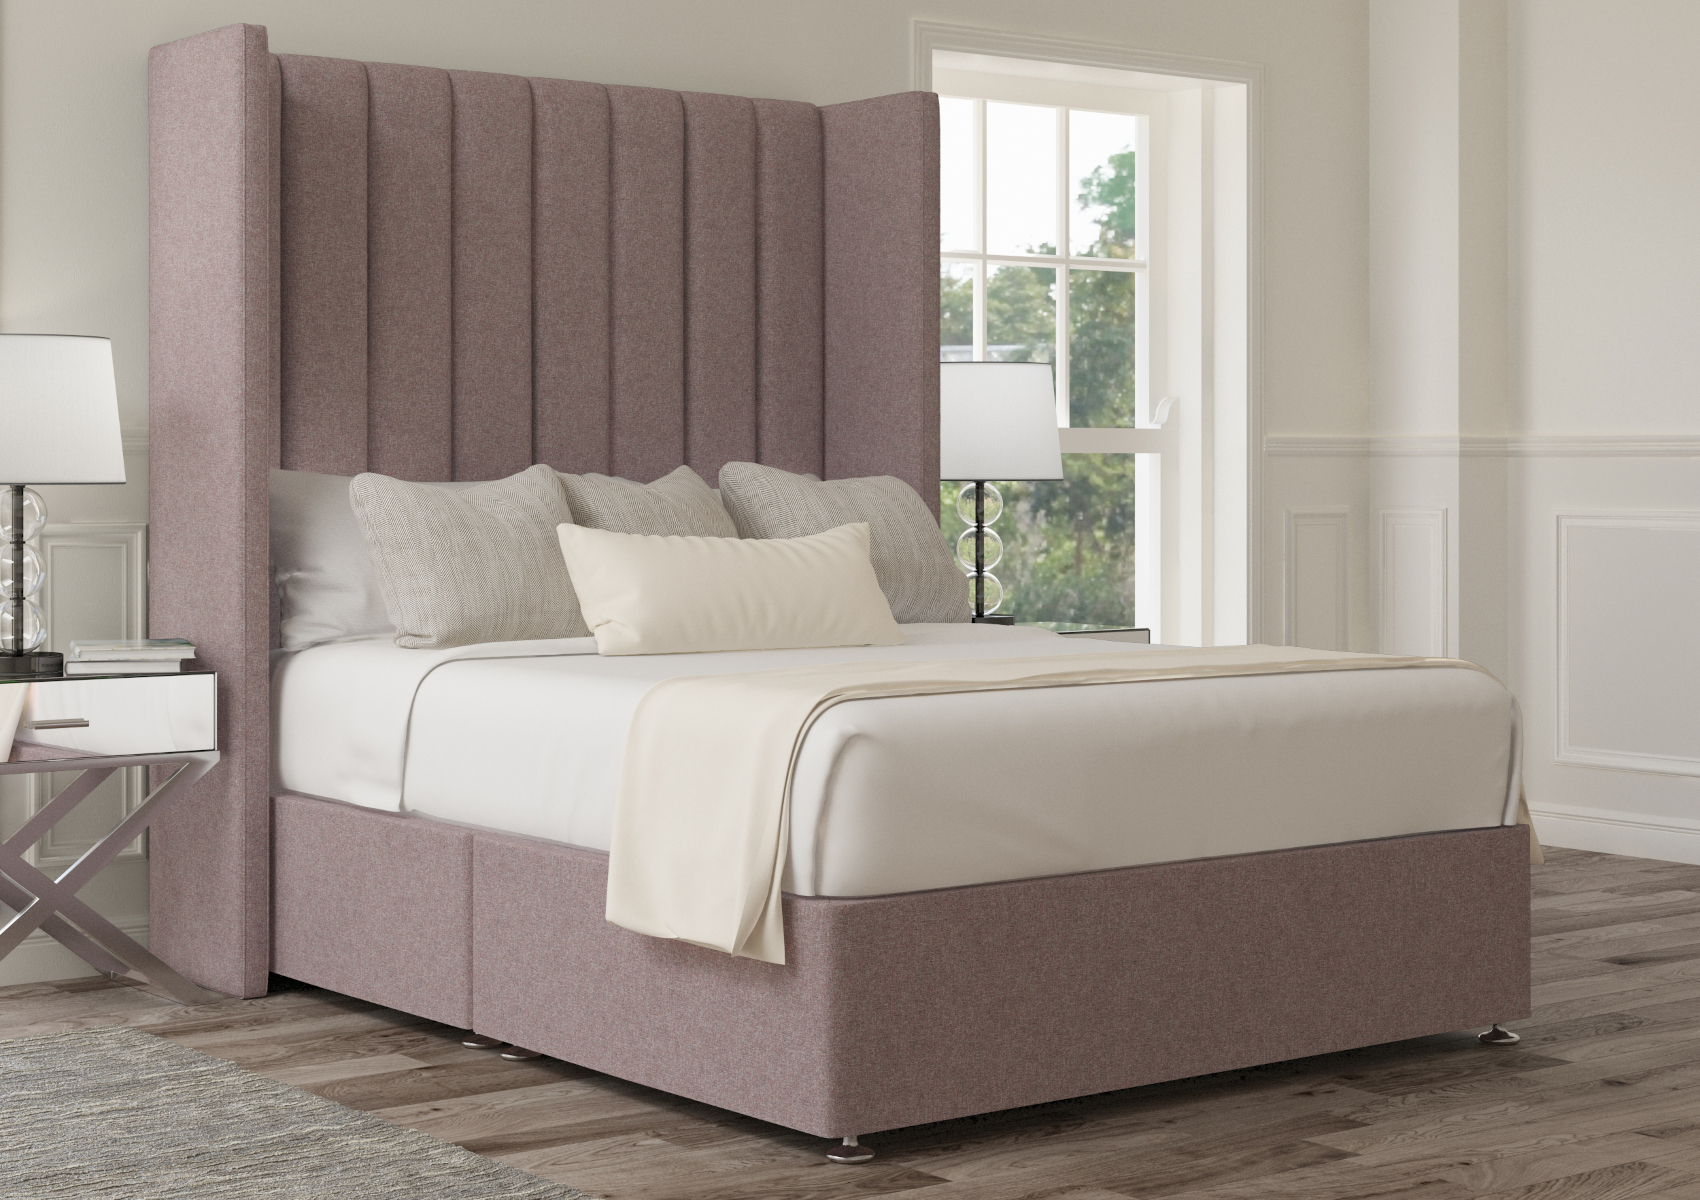 View Lola Arran Pebble Upholstered Double Winged Bed Time4Sleep information